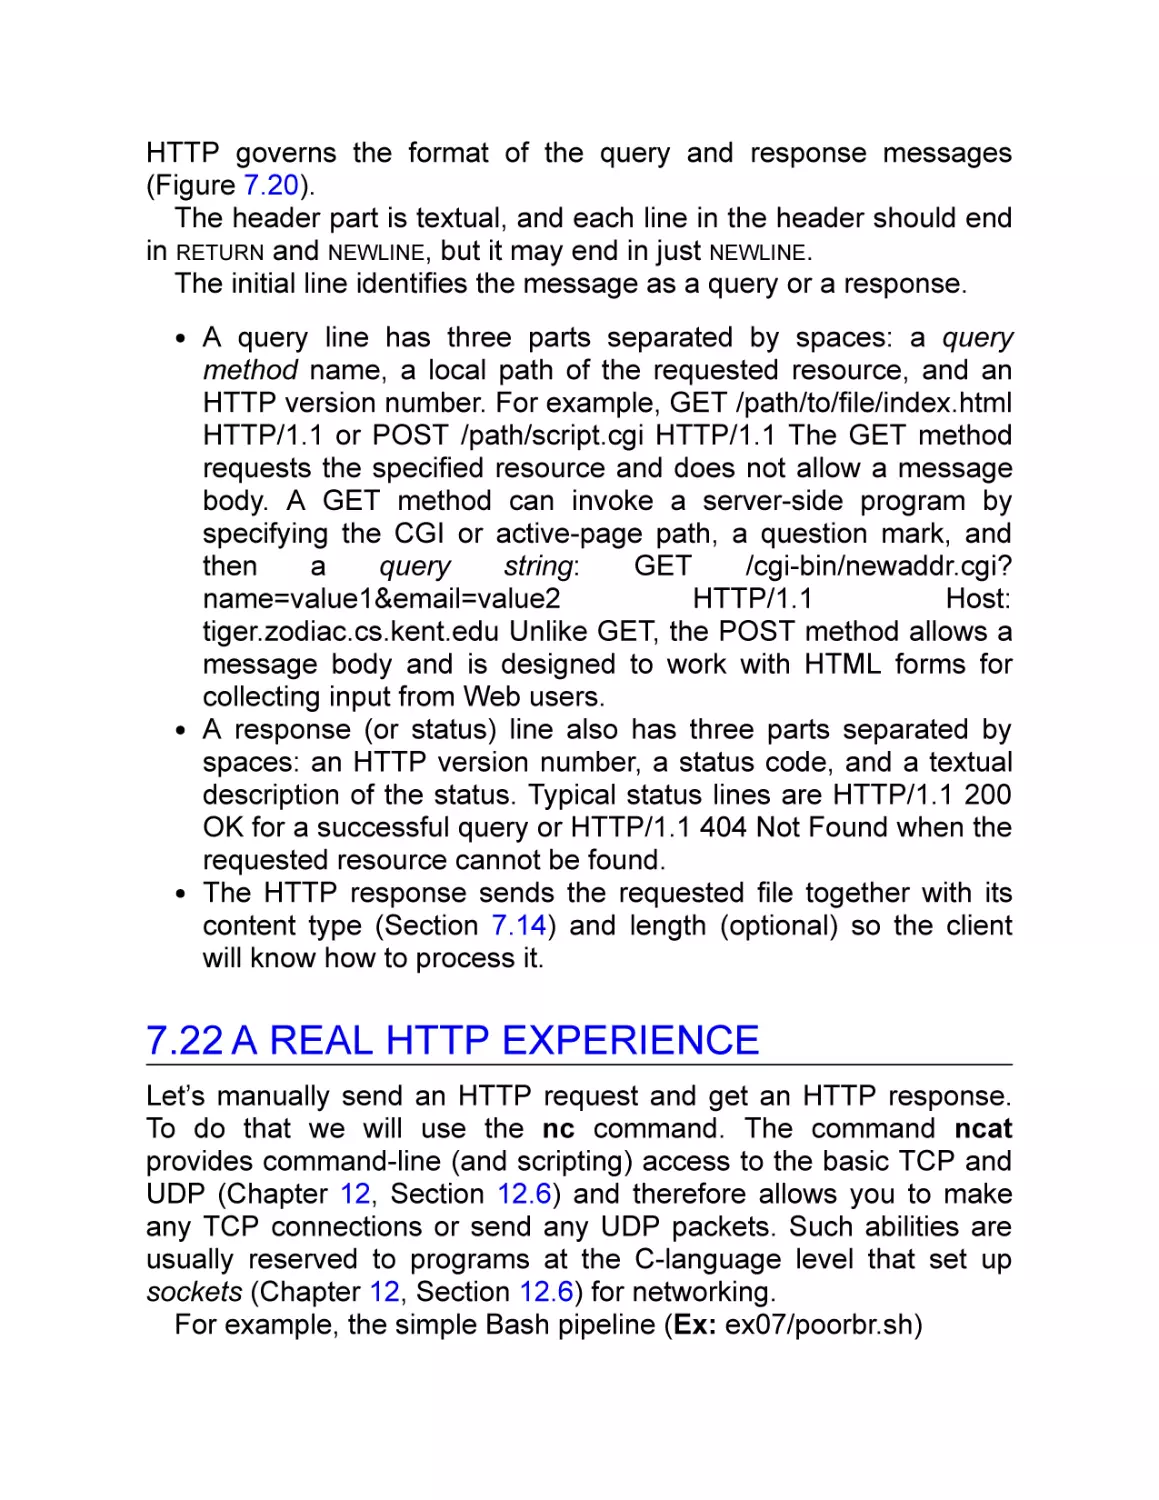 7.22 A Real HTTP Experience